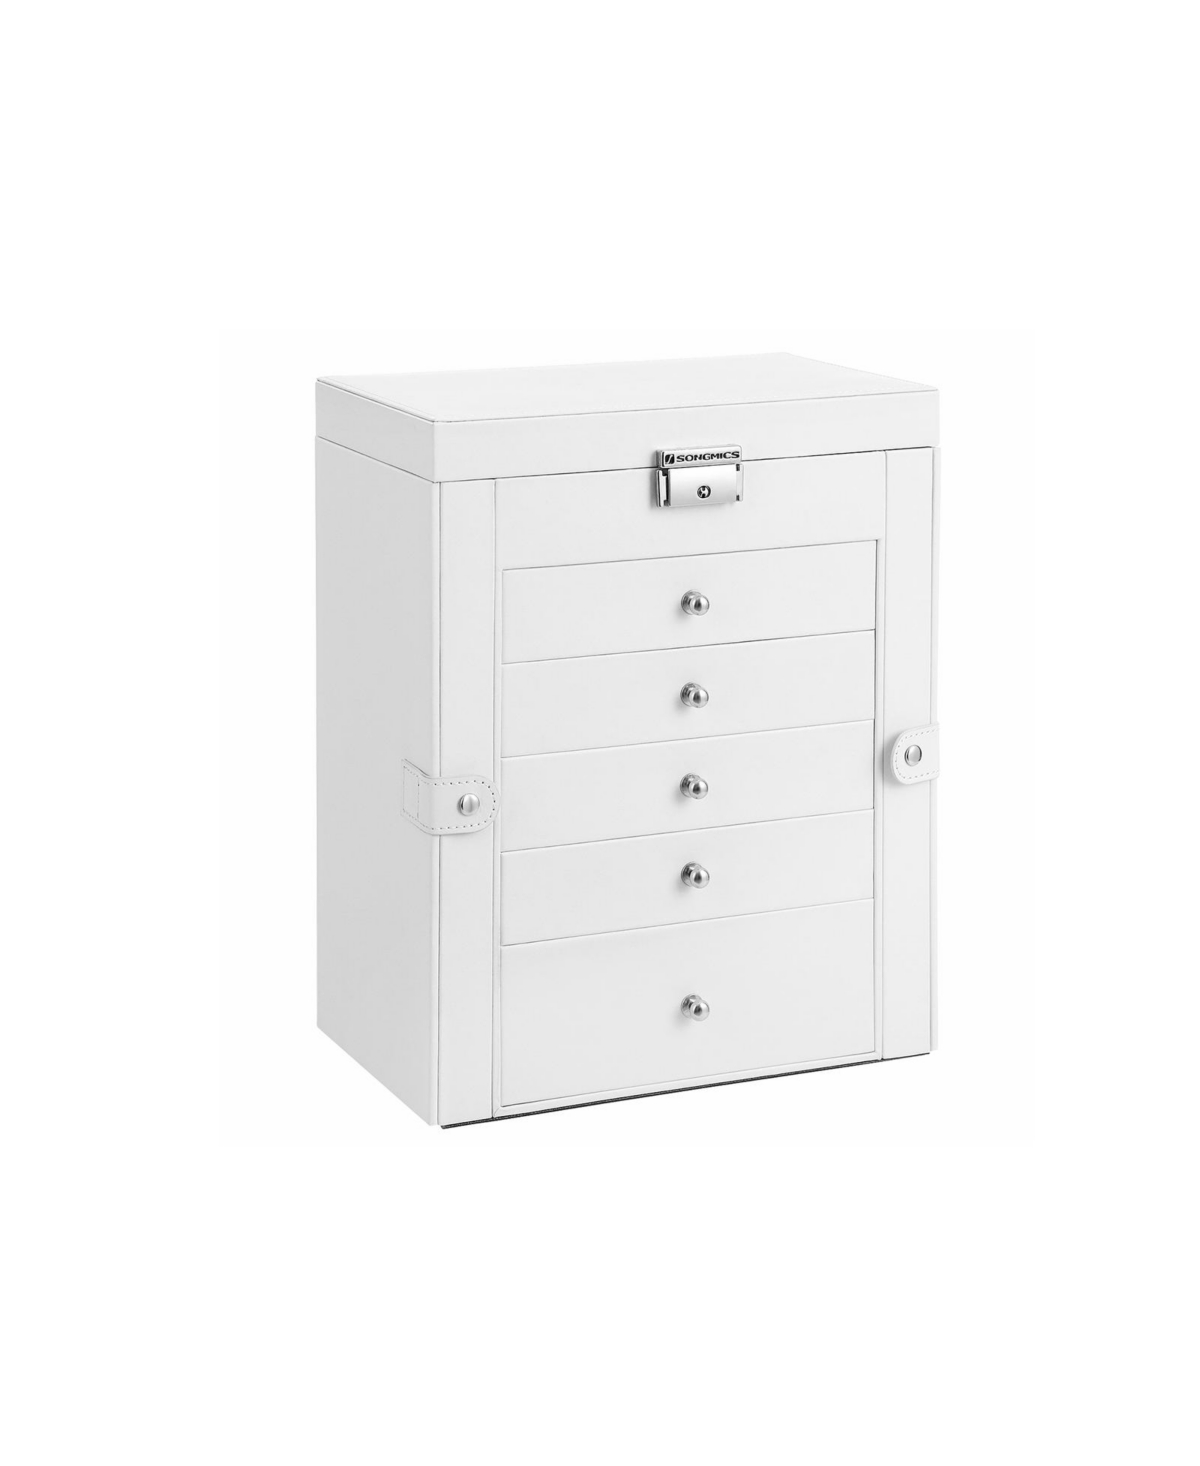 6-tier Large Jewelry Case With Drawers - White